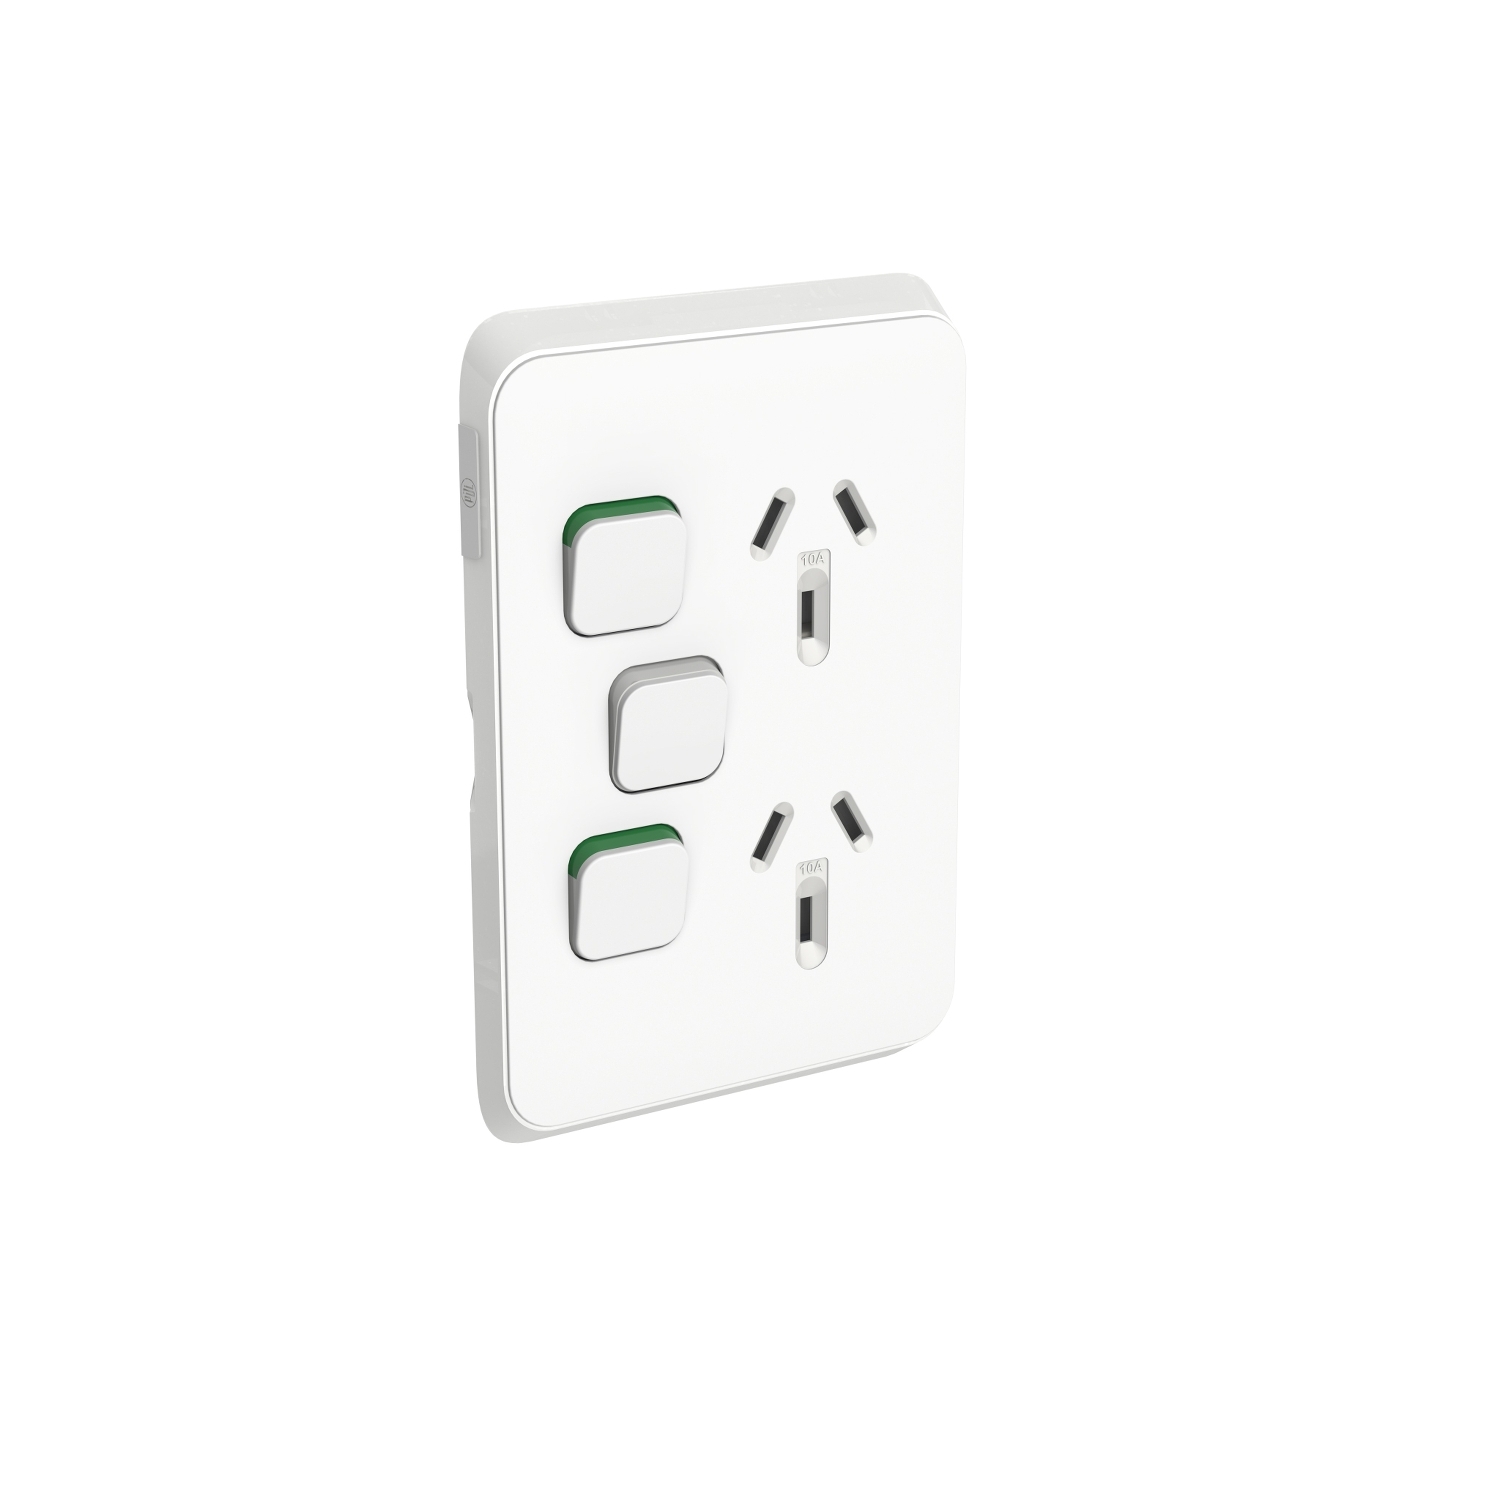 PDL392X-VW - PDL Iconic Double Switched Socket + Switch Vertical 10Amp - Vivid White